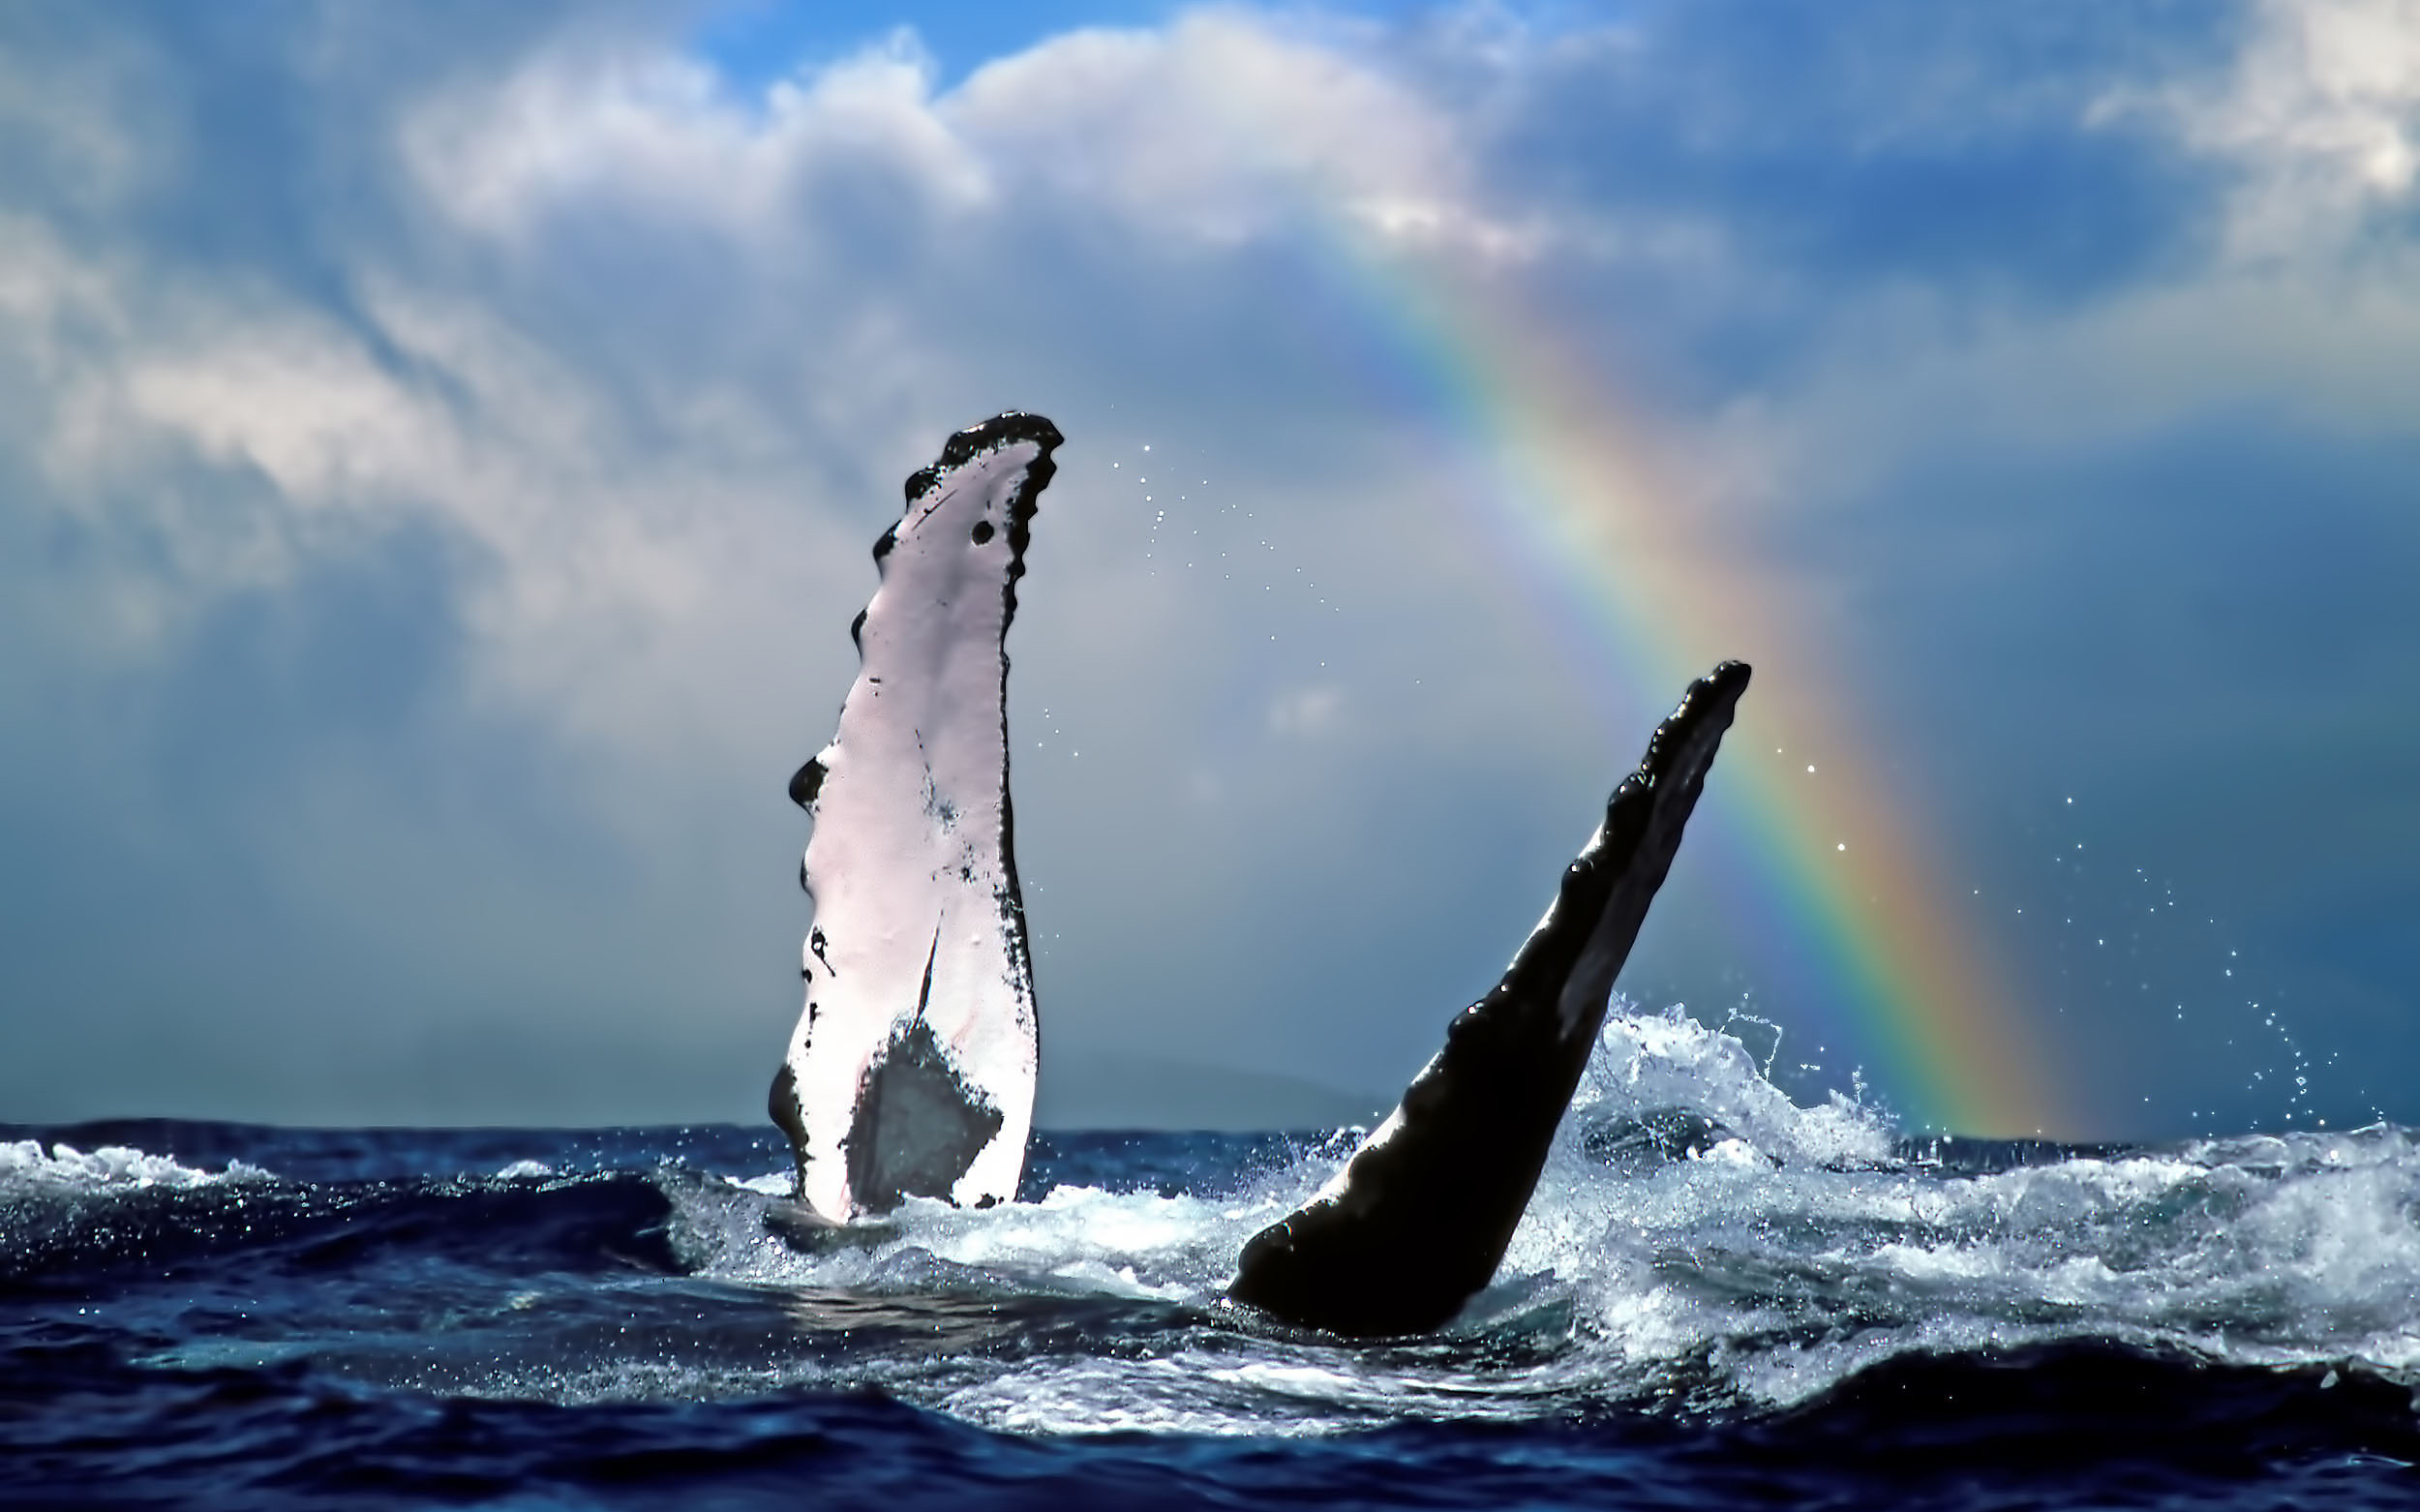 Image: Encountering Giants: Inspiring Moments with Whales